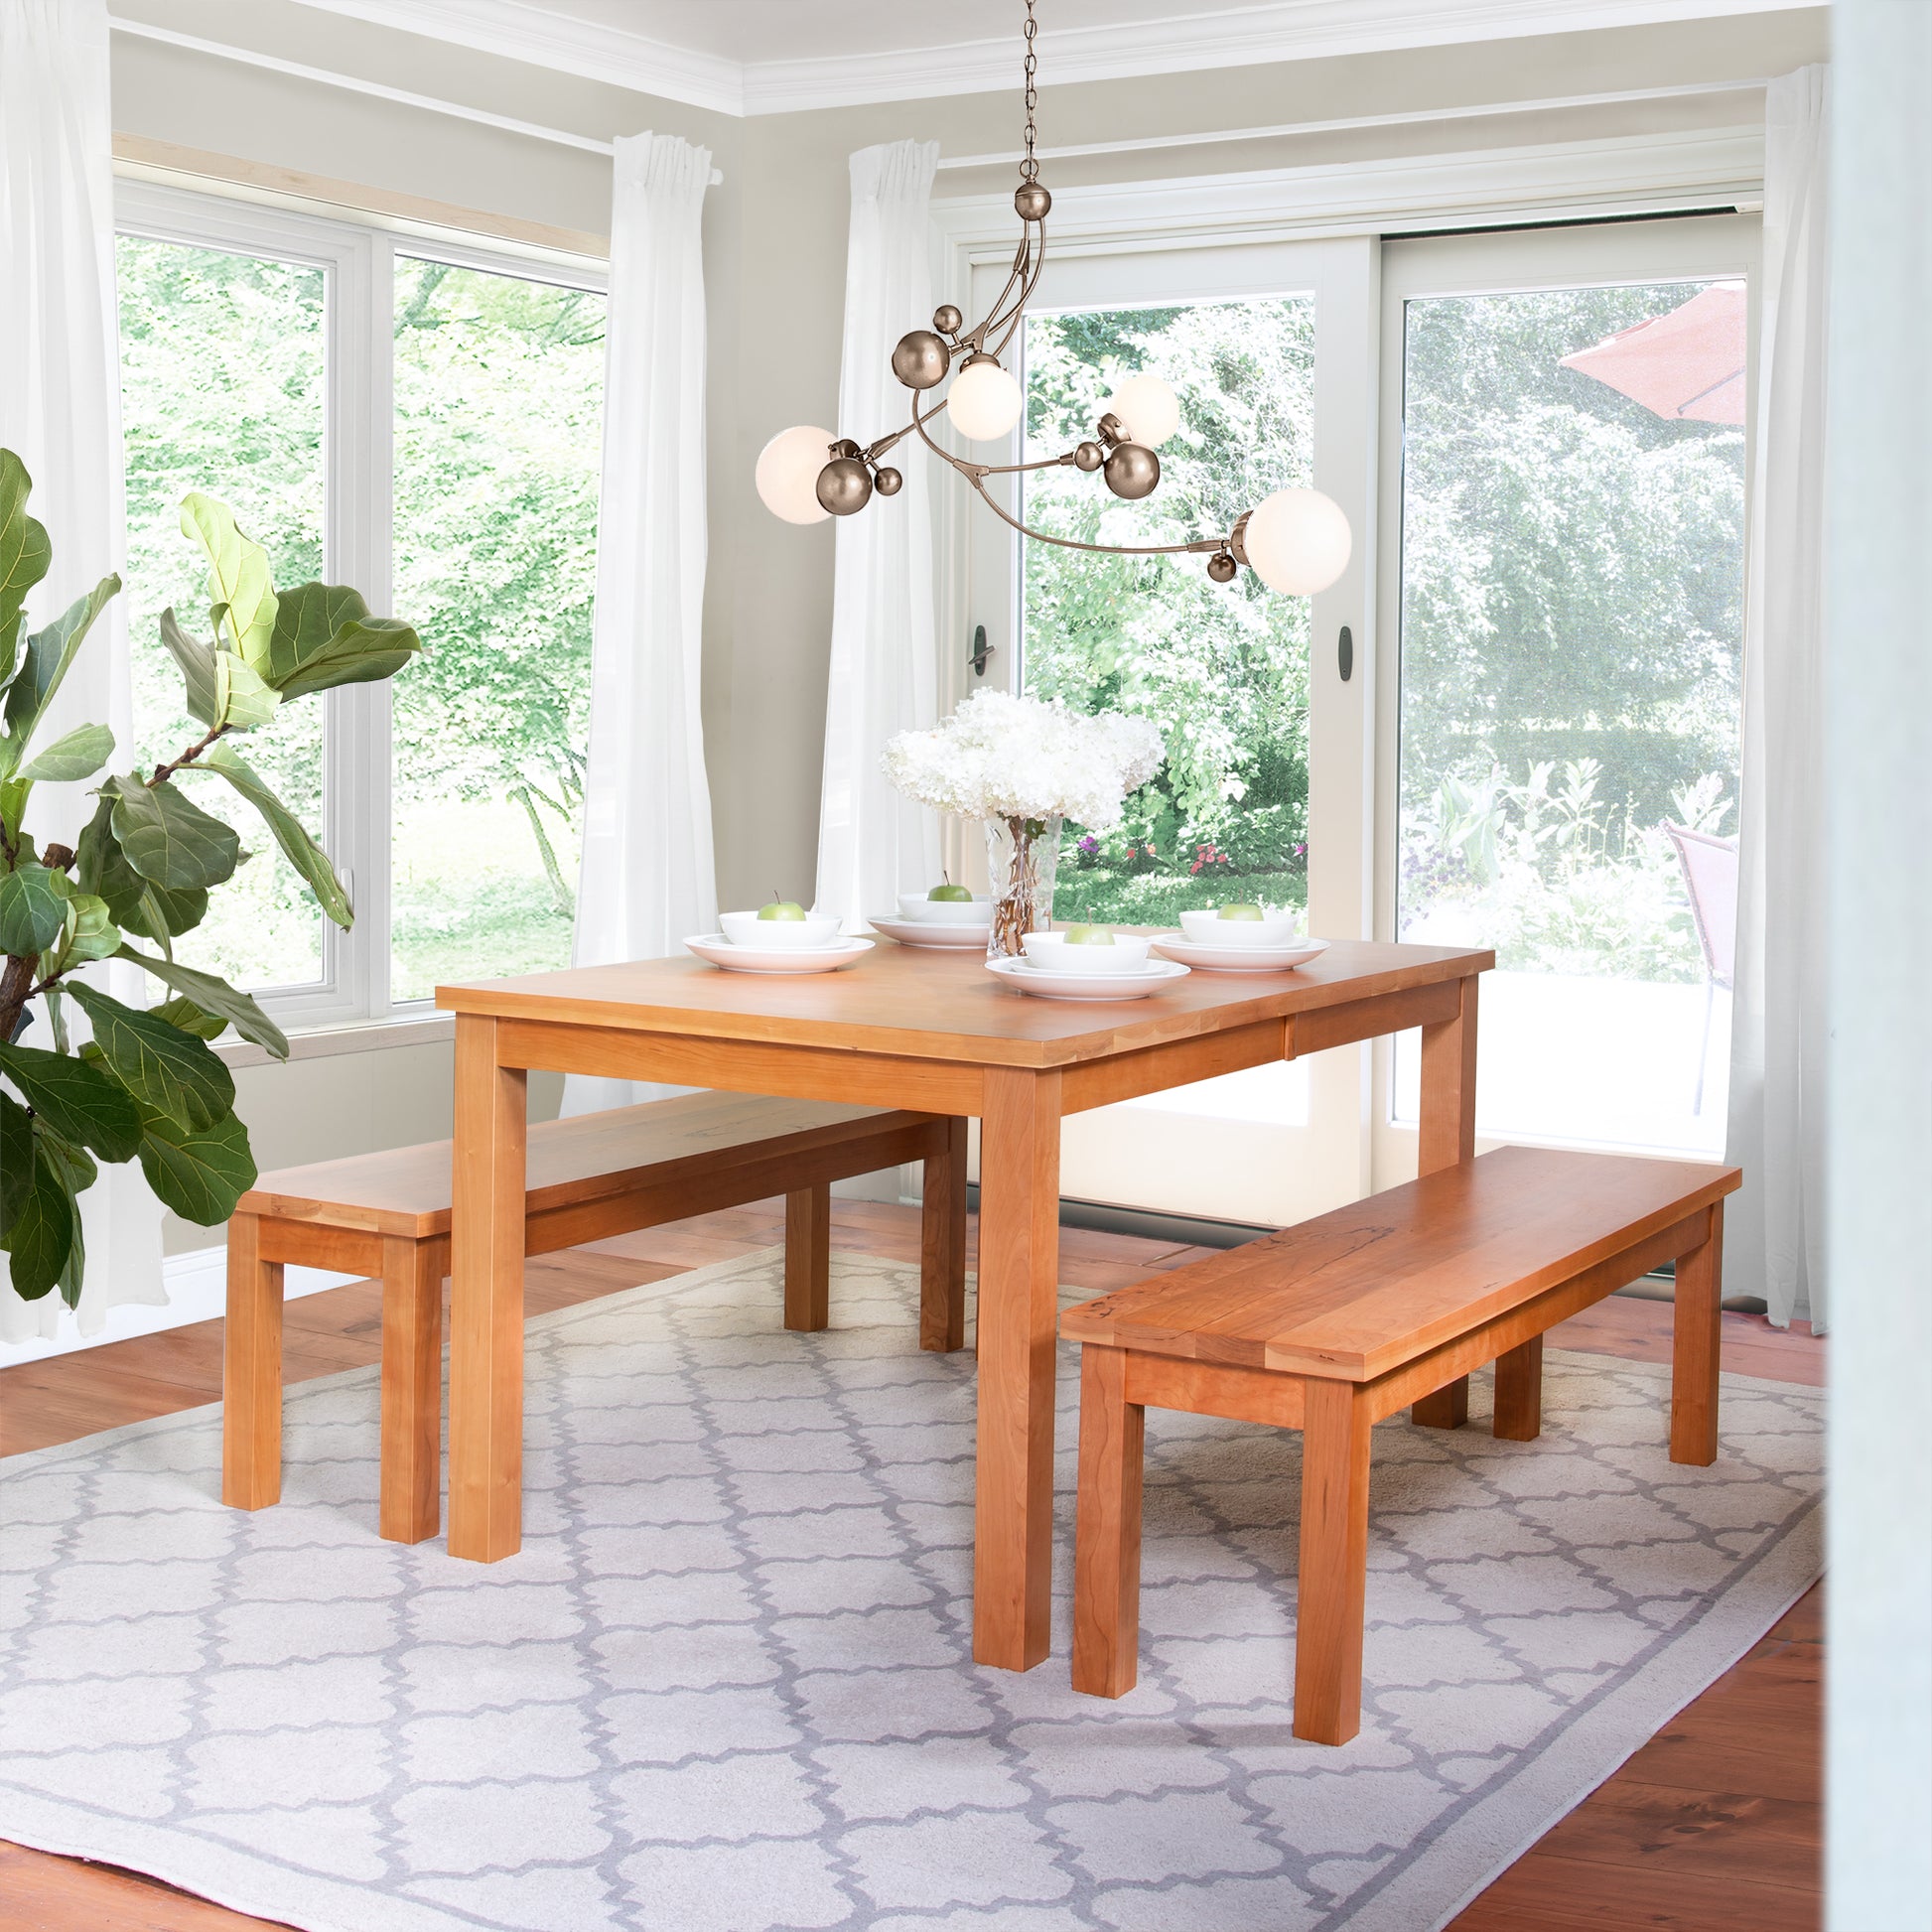 A dining room with a high-quality Lyndon Furniture American Mission Bench and chairs.